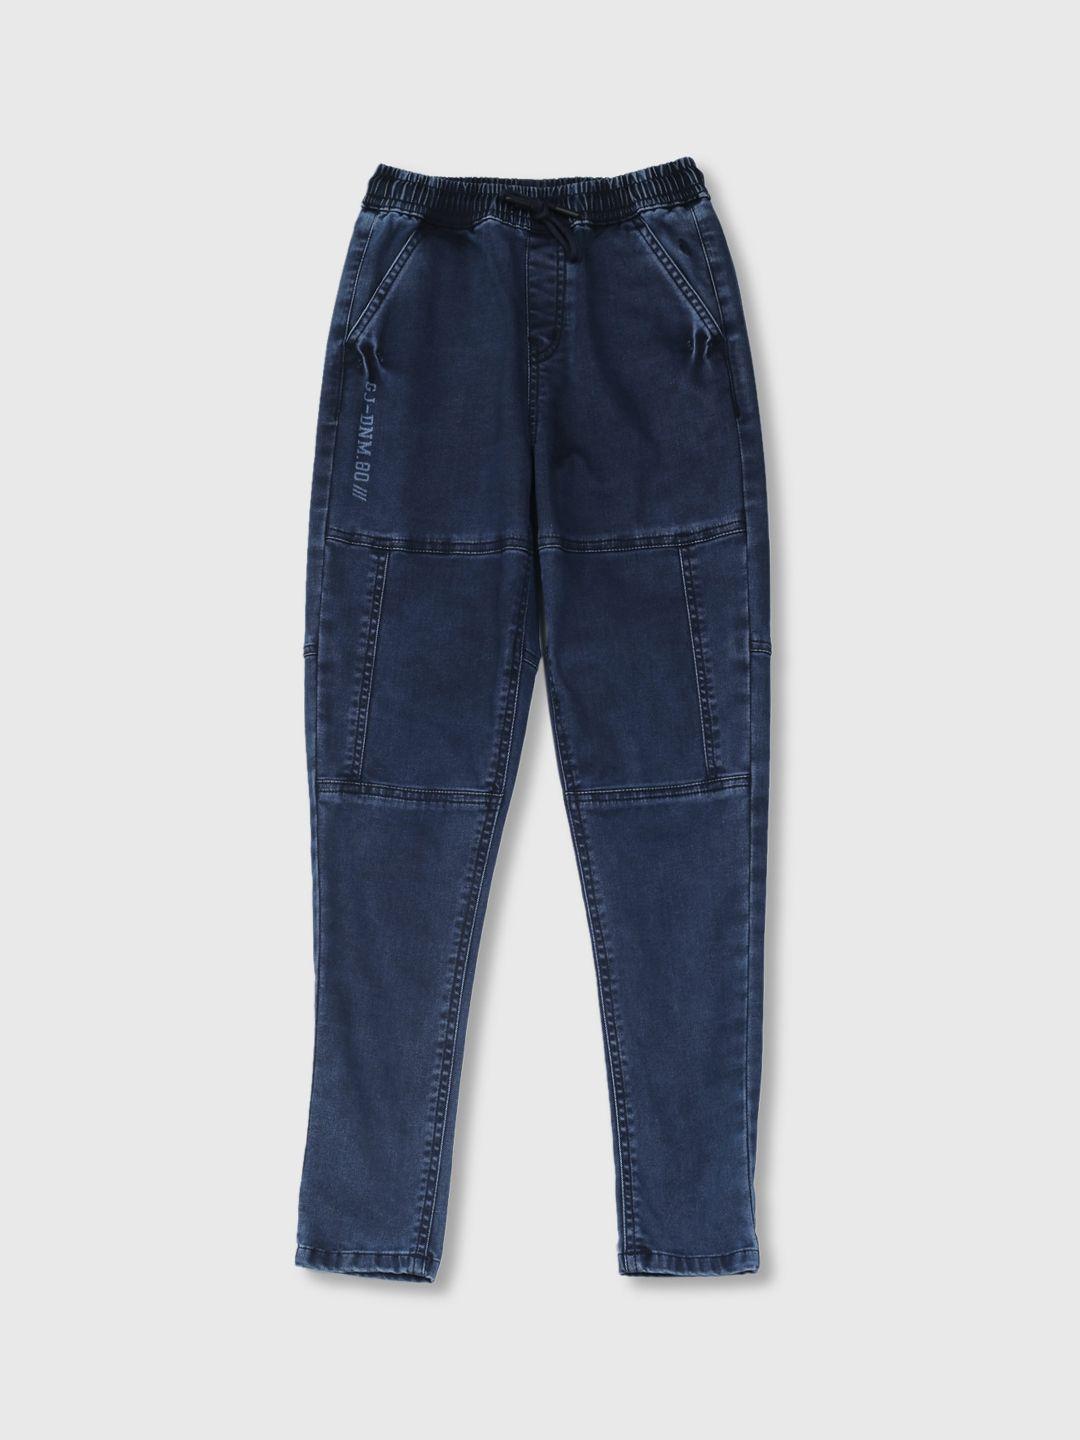 gini-and-jony-boys-cotton-mid-rise-regular-fit-jeans